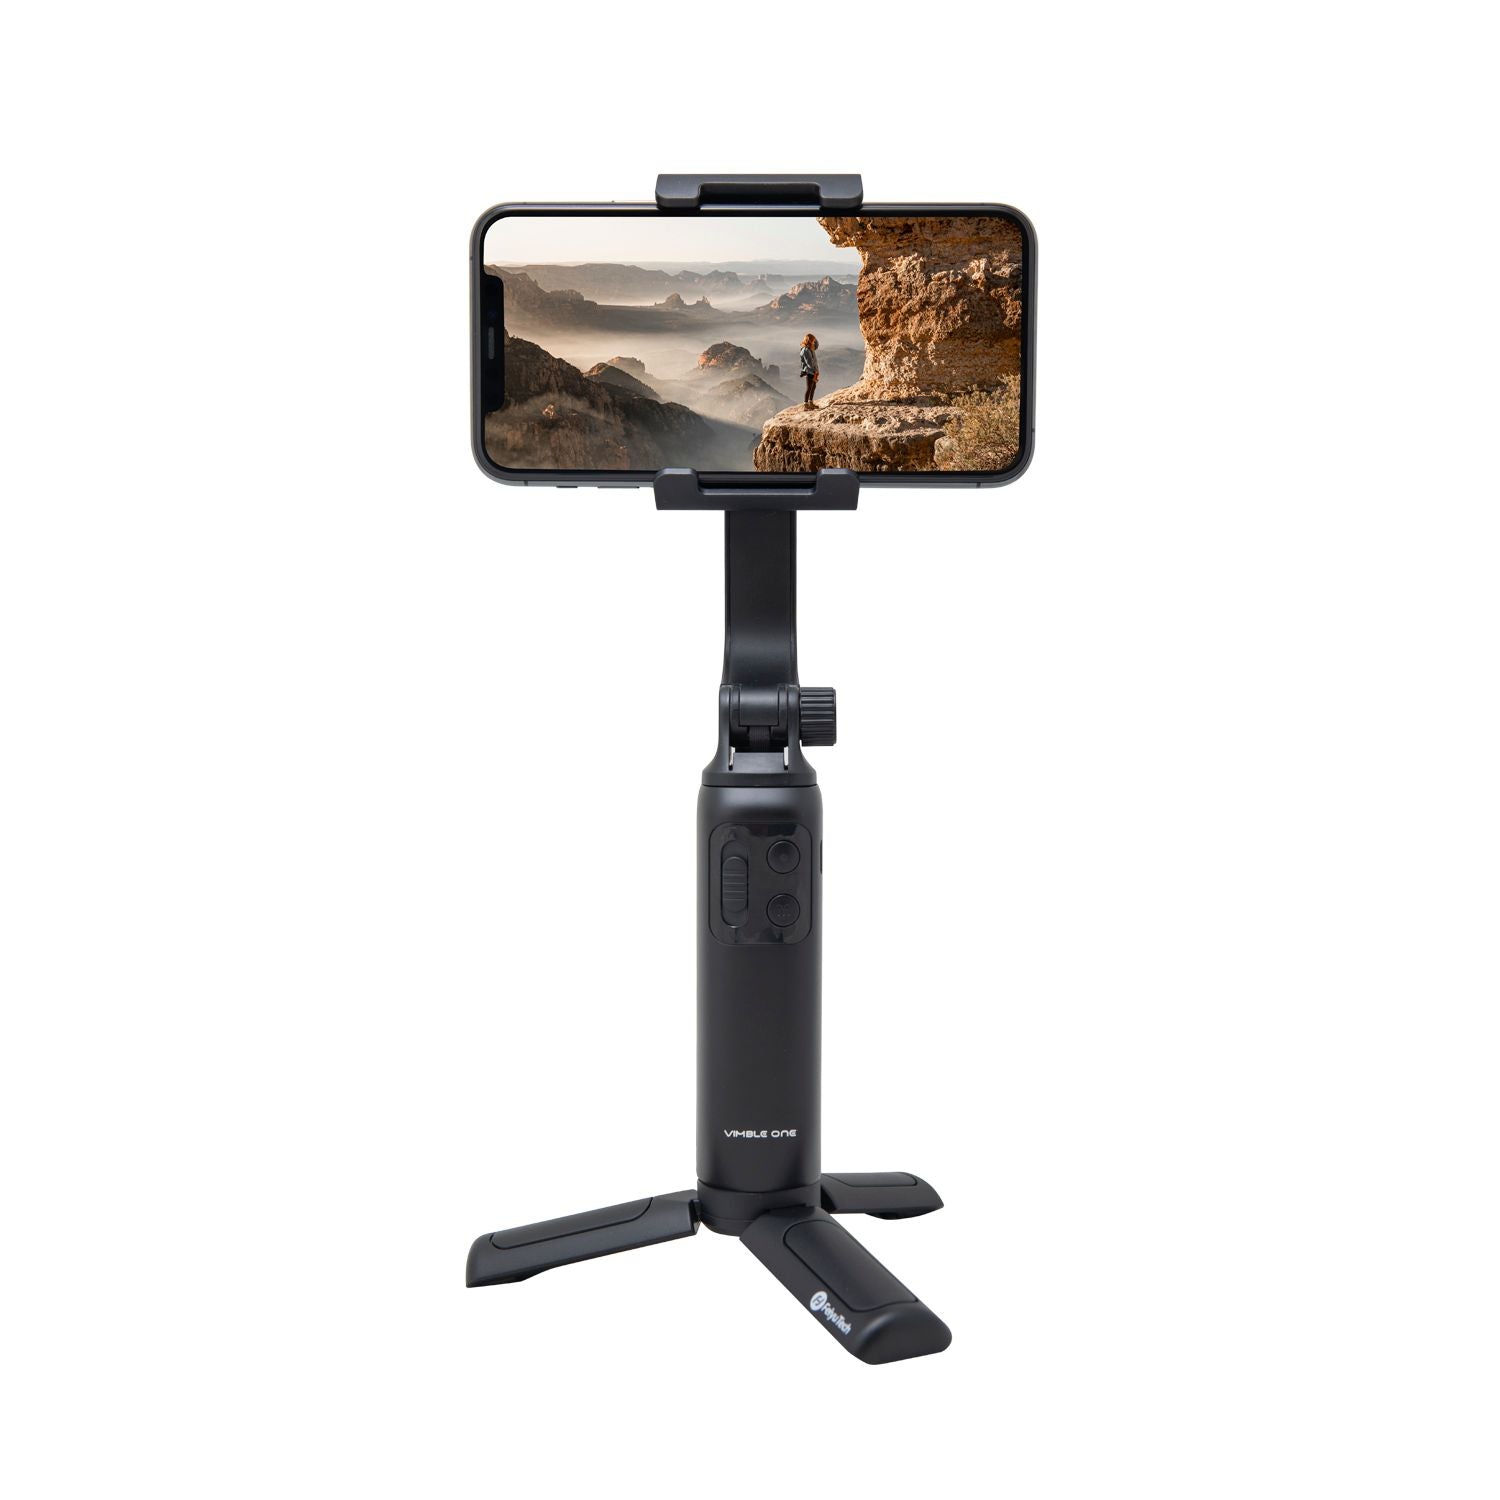 Vimble ONE stands on a built-in tripod